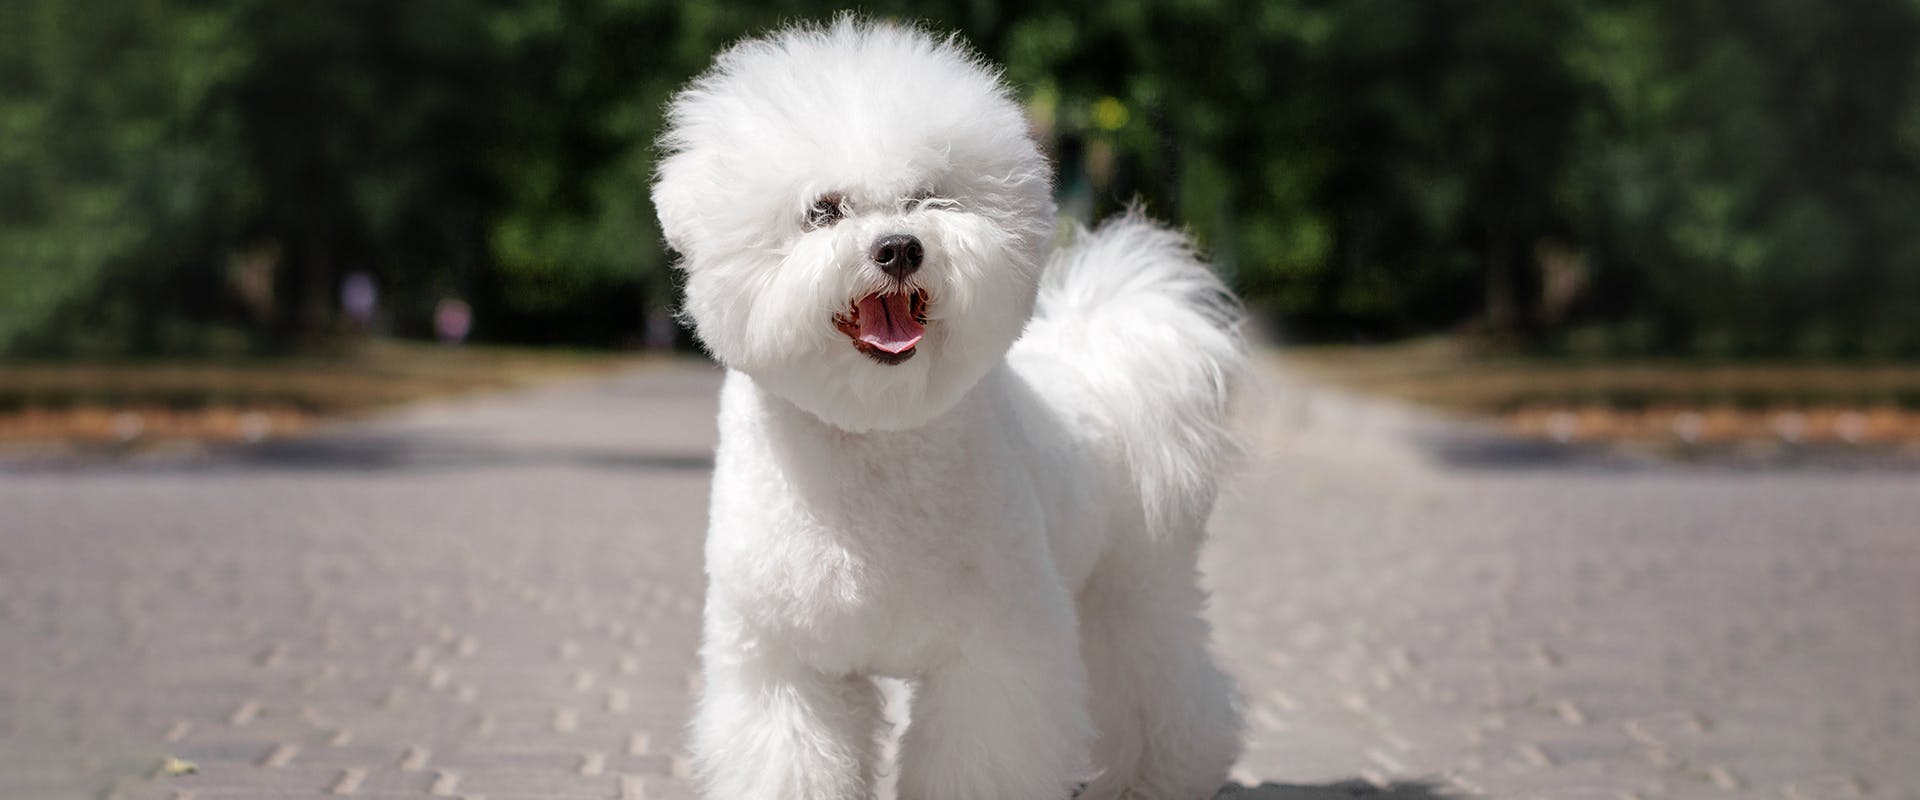 A white, fluffy Bichon Frise dog standing on a grey path lined with trees